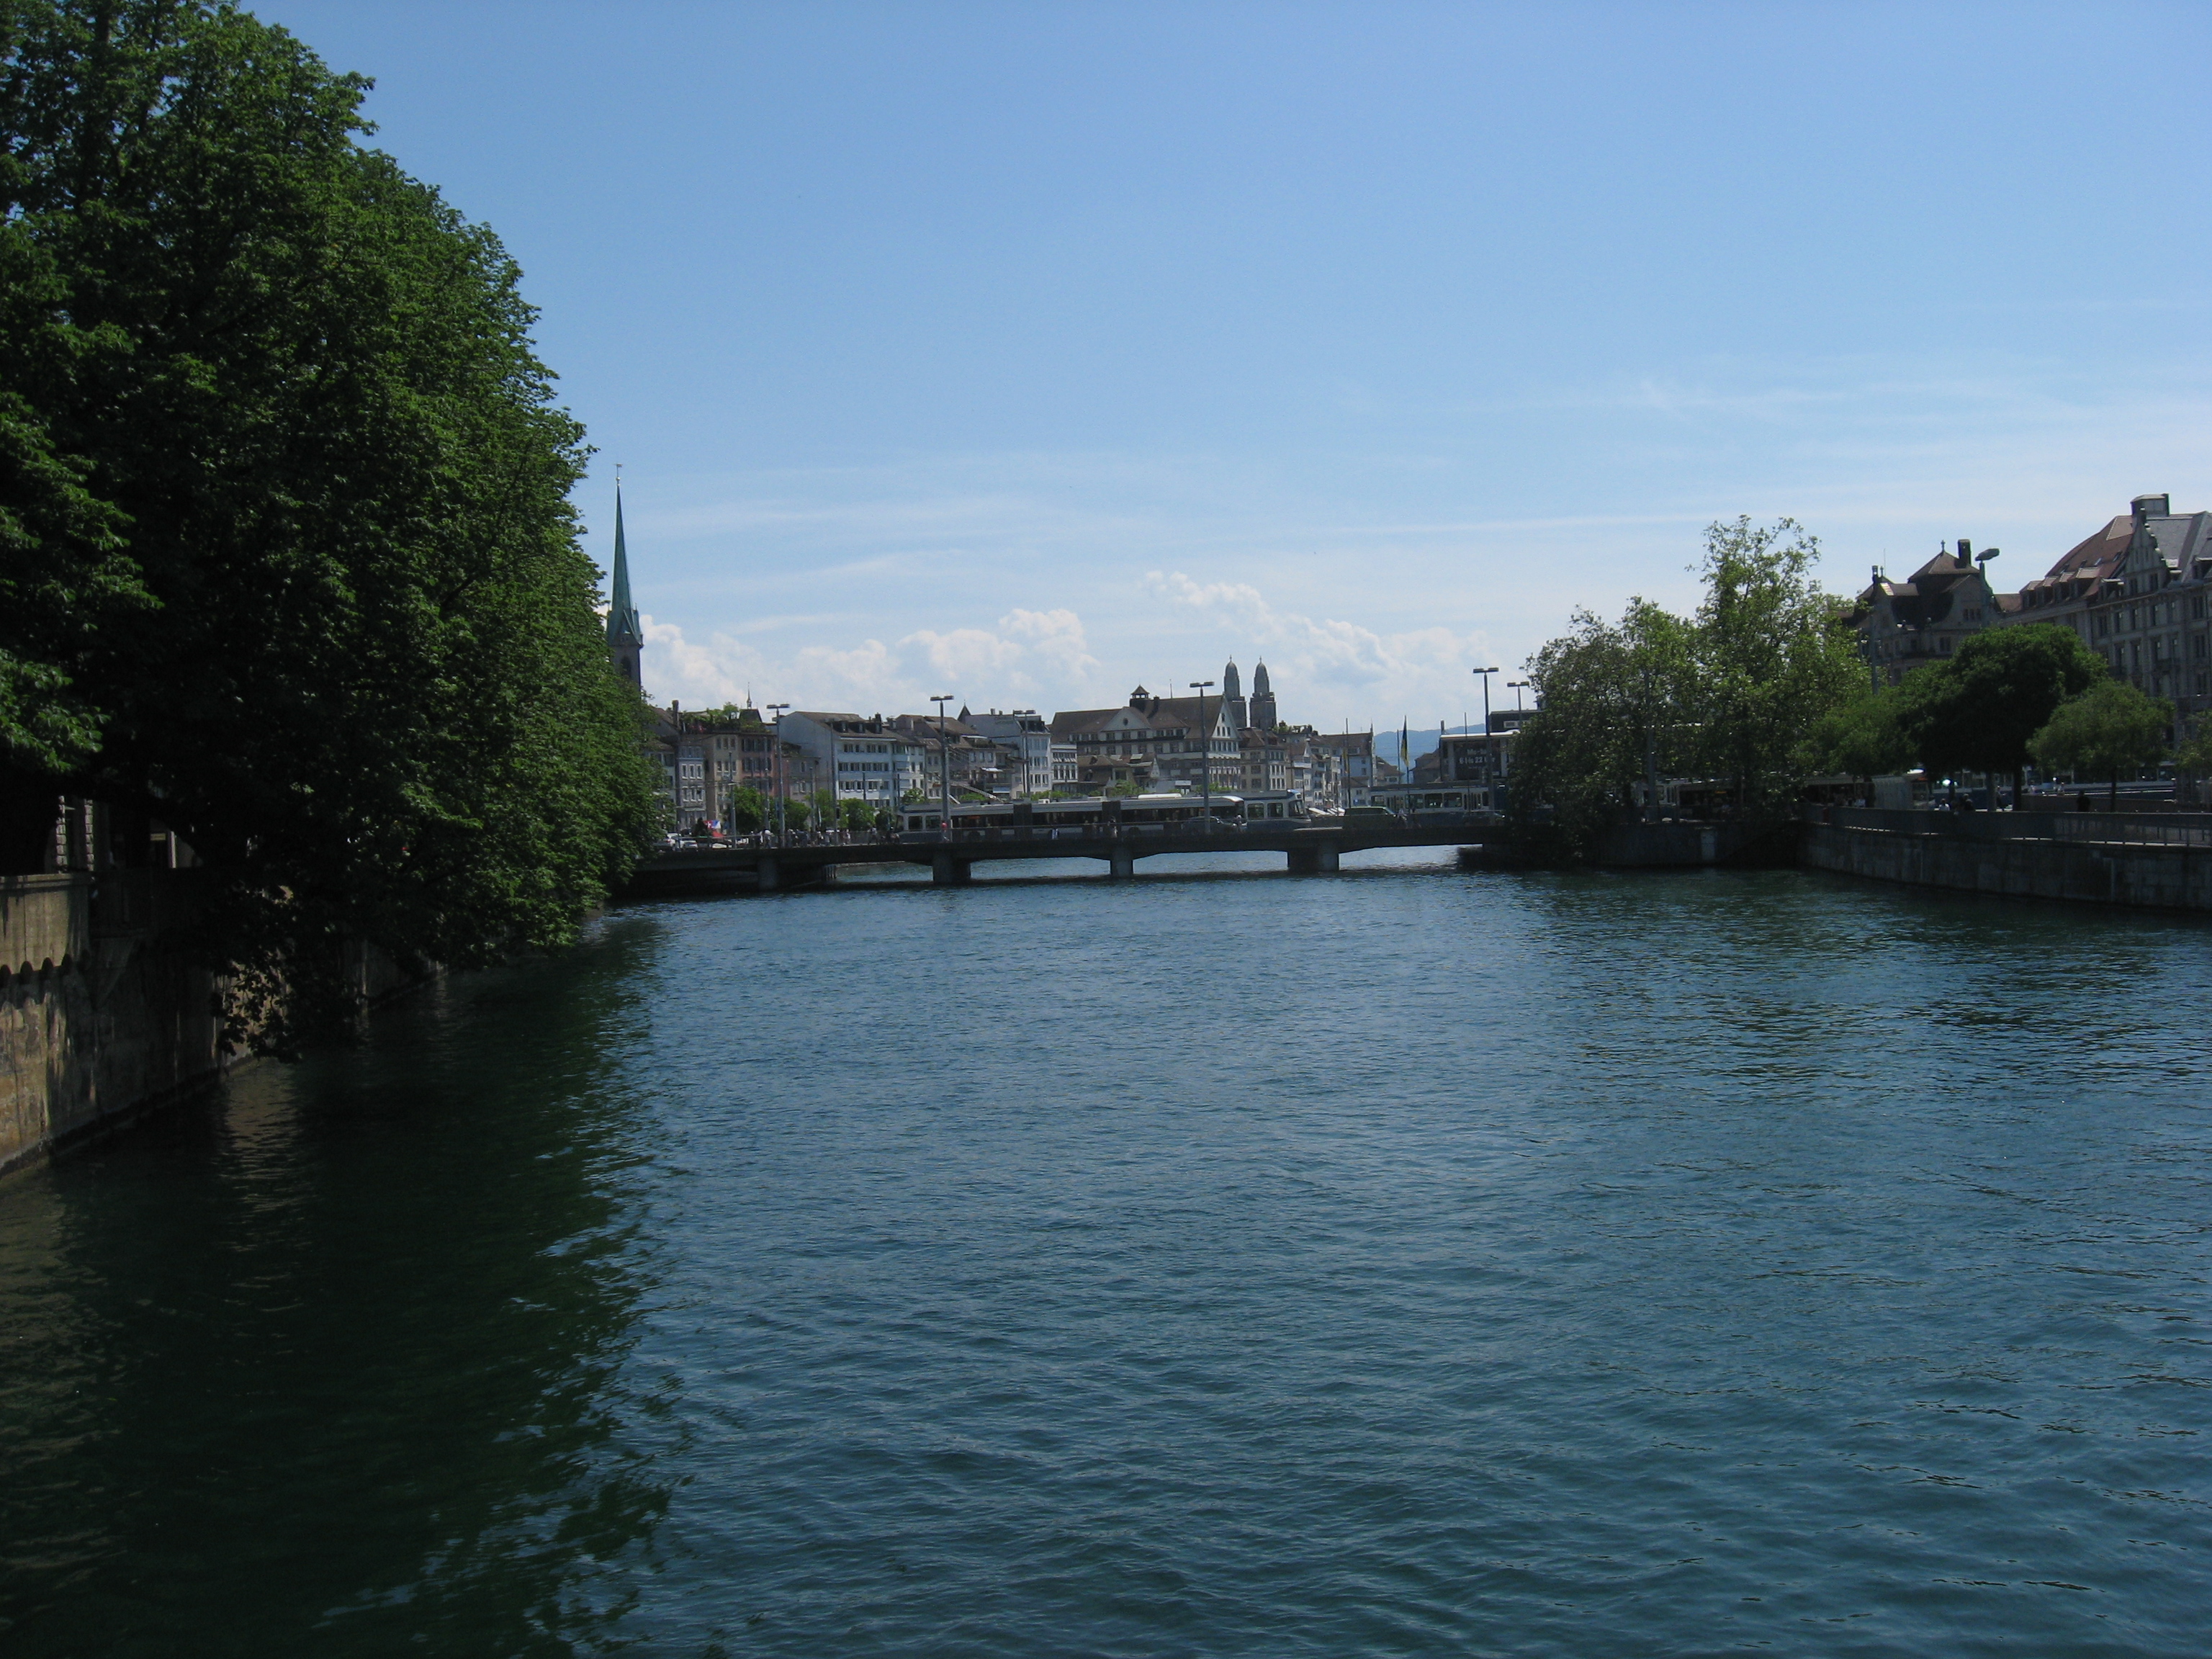 The Limmat river with trees on both sides